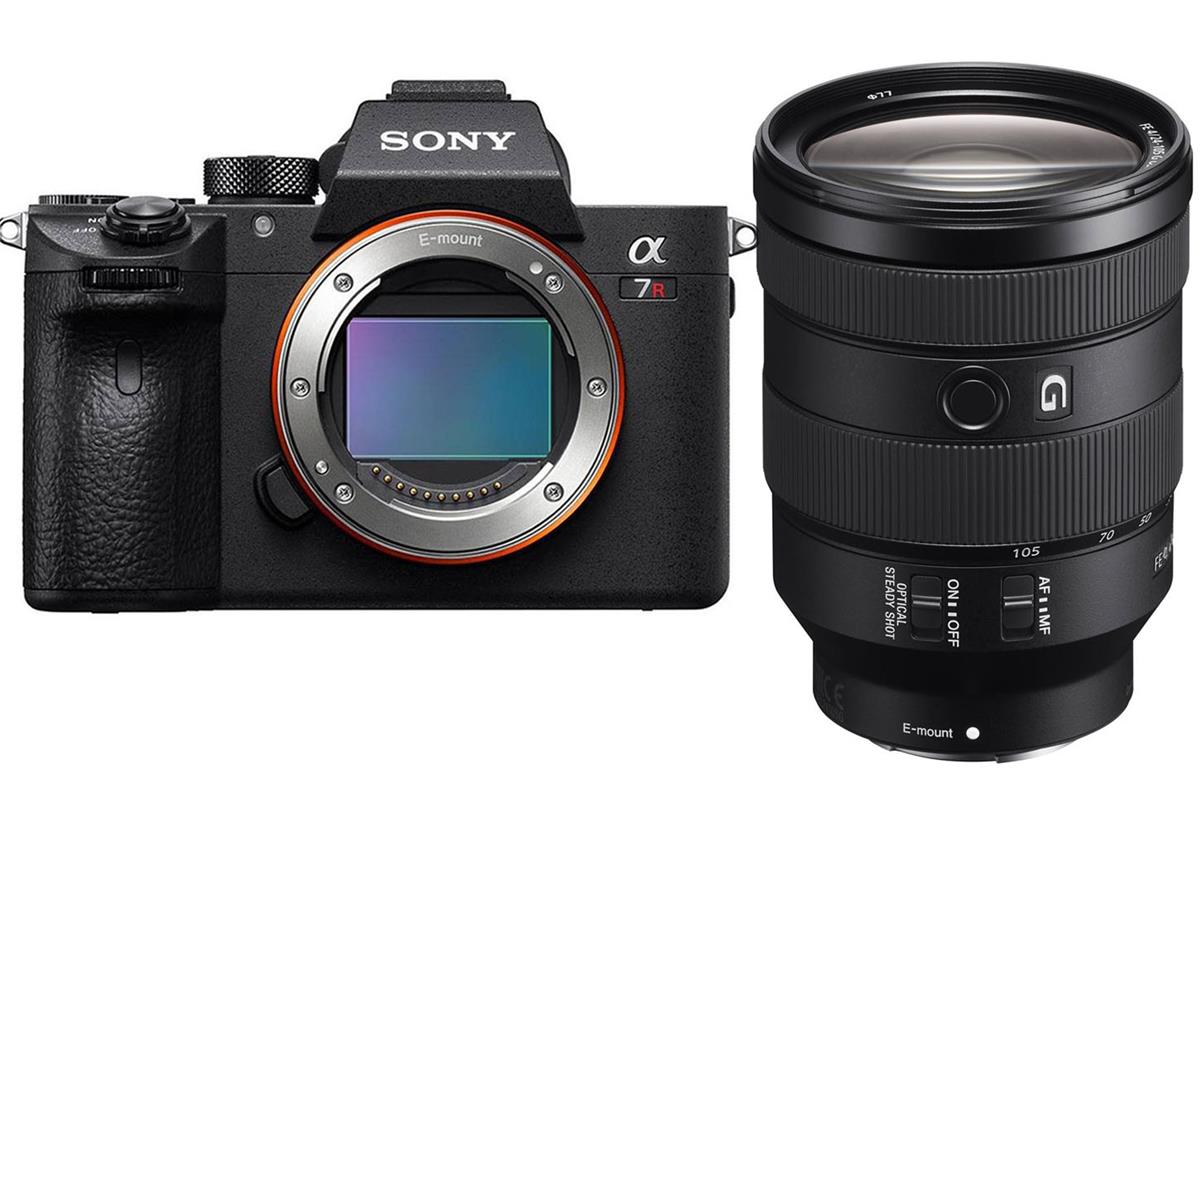 Image of Sony Alpha a7R III Mirrorless Camera (V2) with FE 24-105mm f/4 G OSS Lens